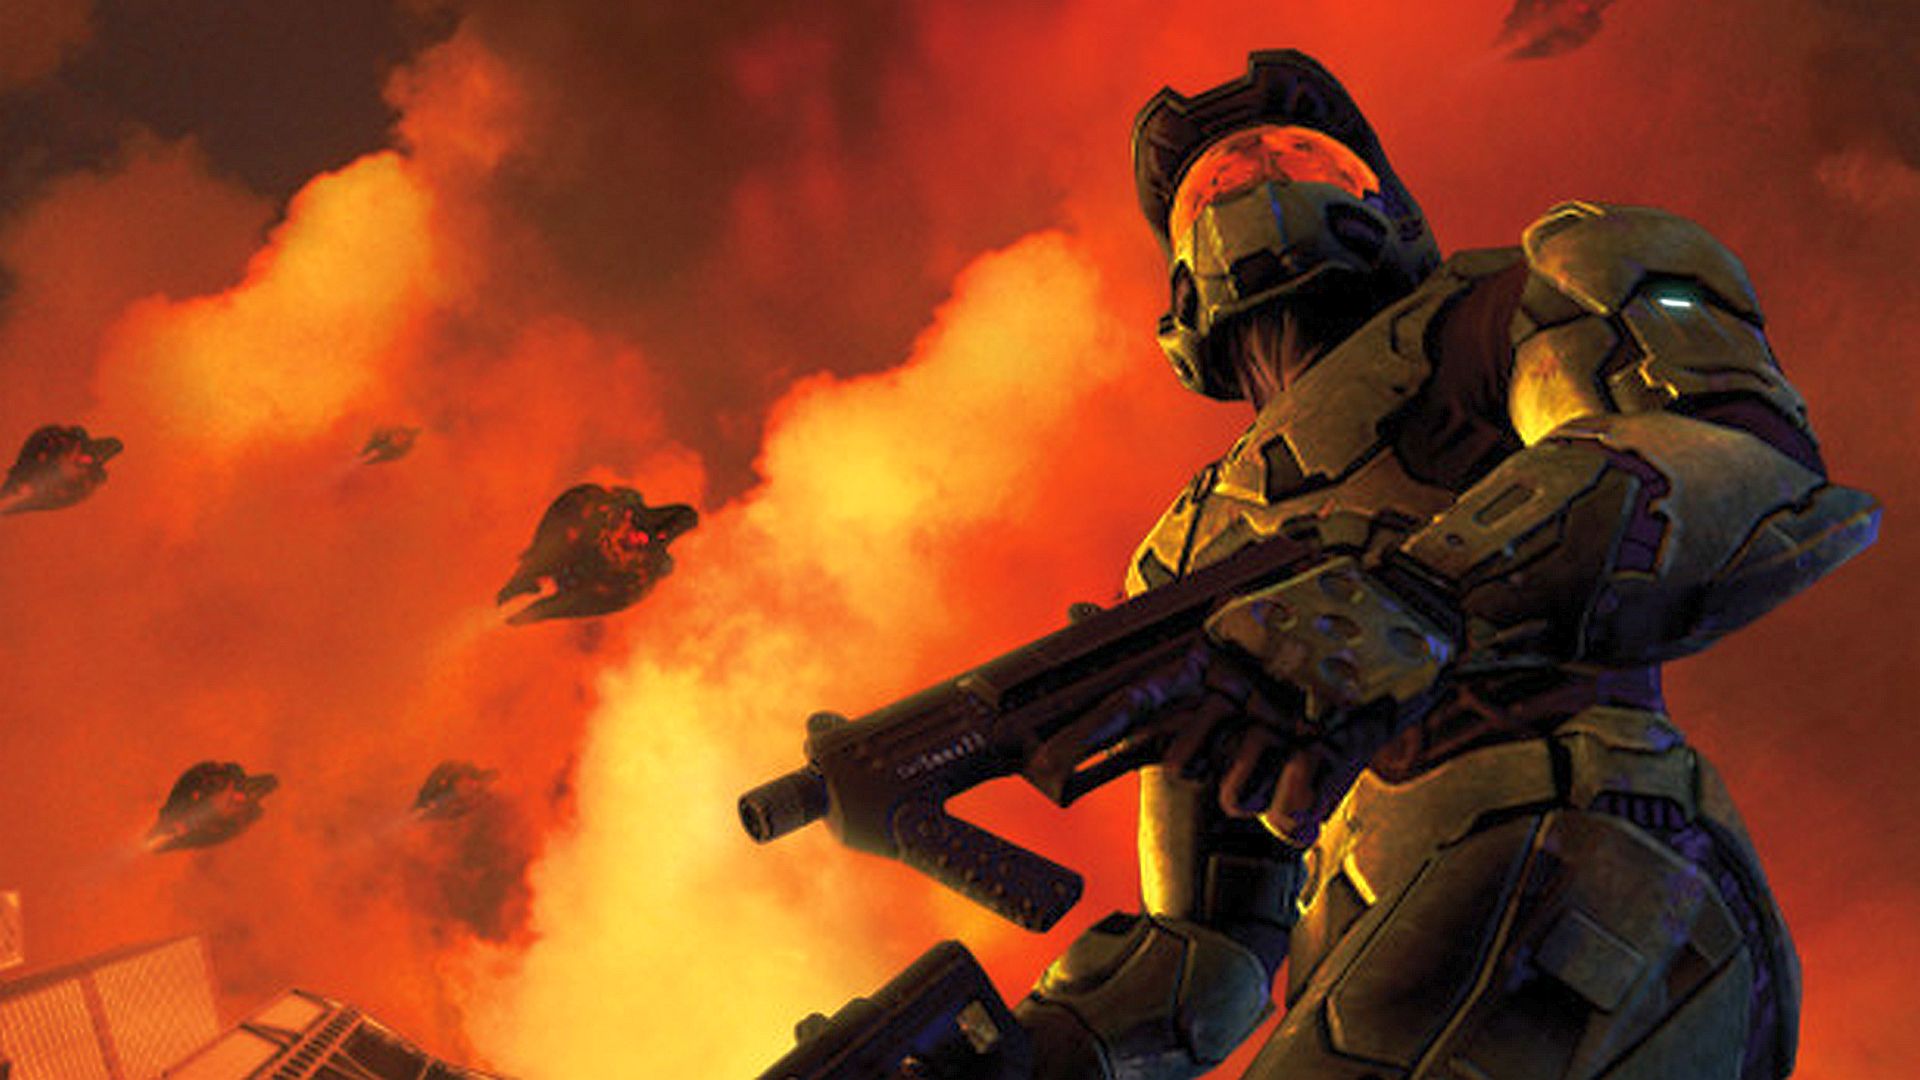 These are the elements removed from the development of Halo CE and Halo 2